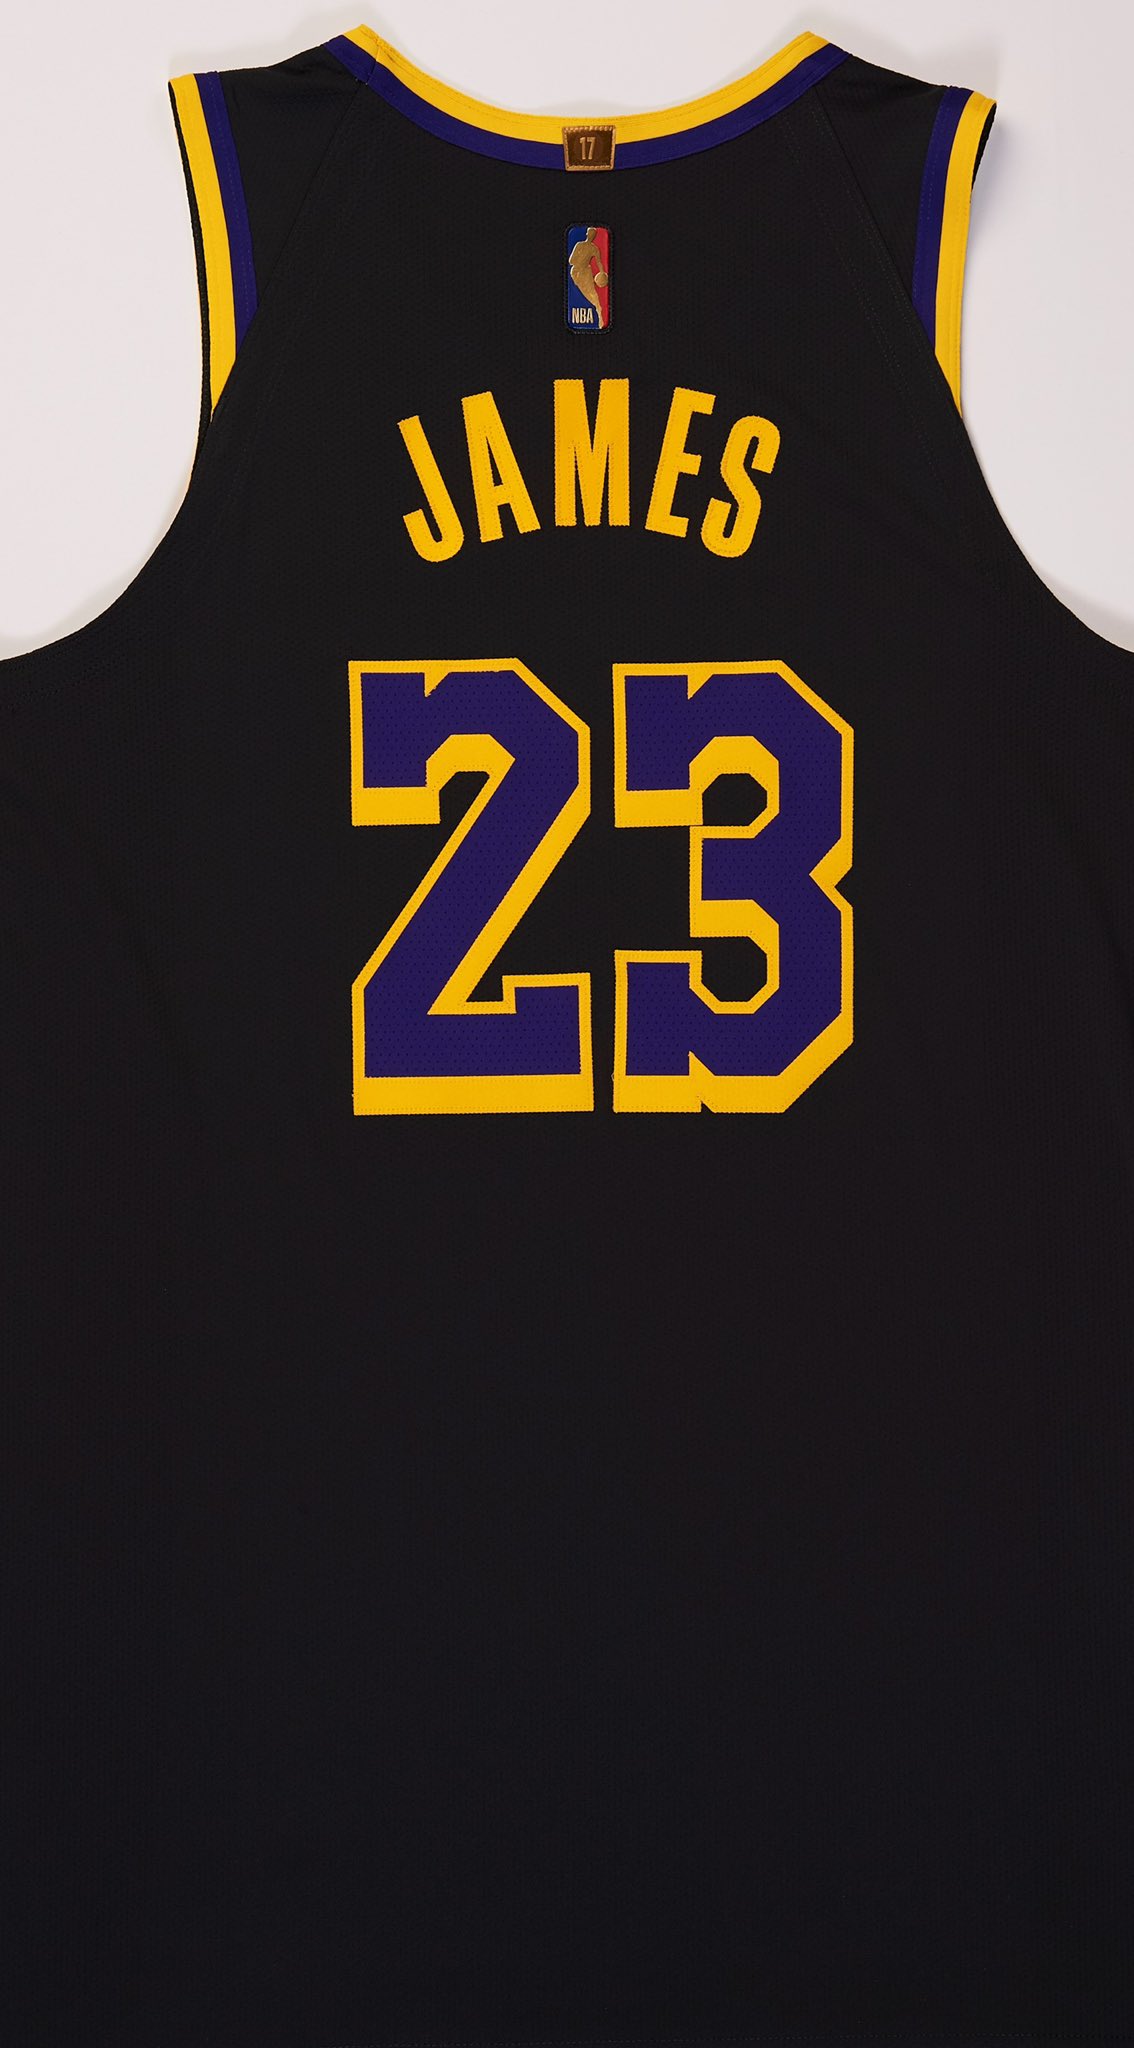 Nick DePaula on X: The Lakers' new “Earned Edition” jersey, with